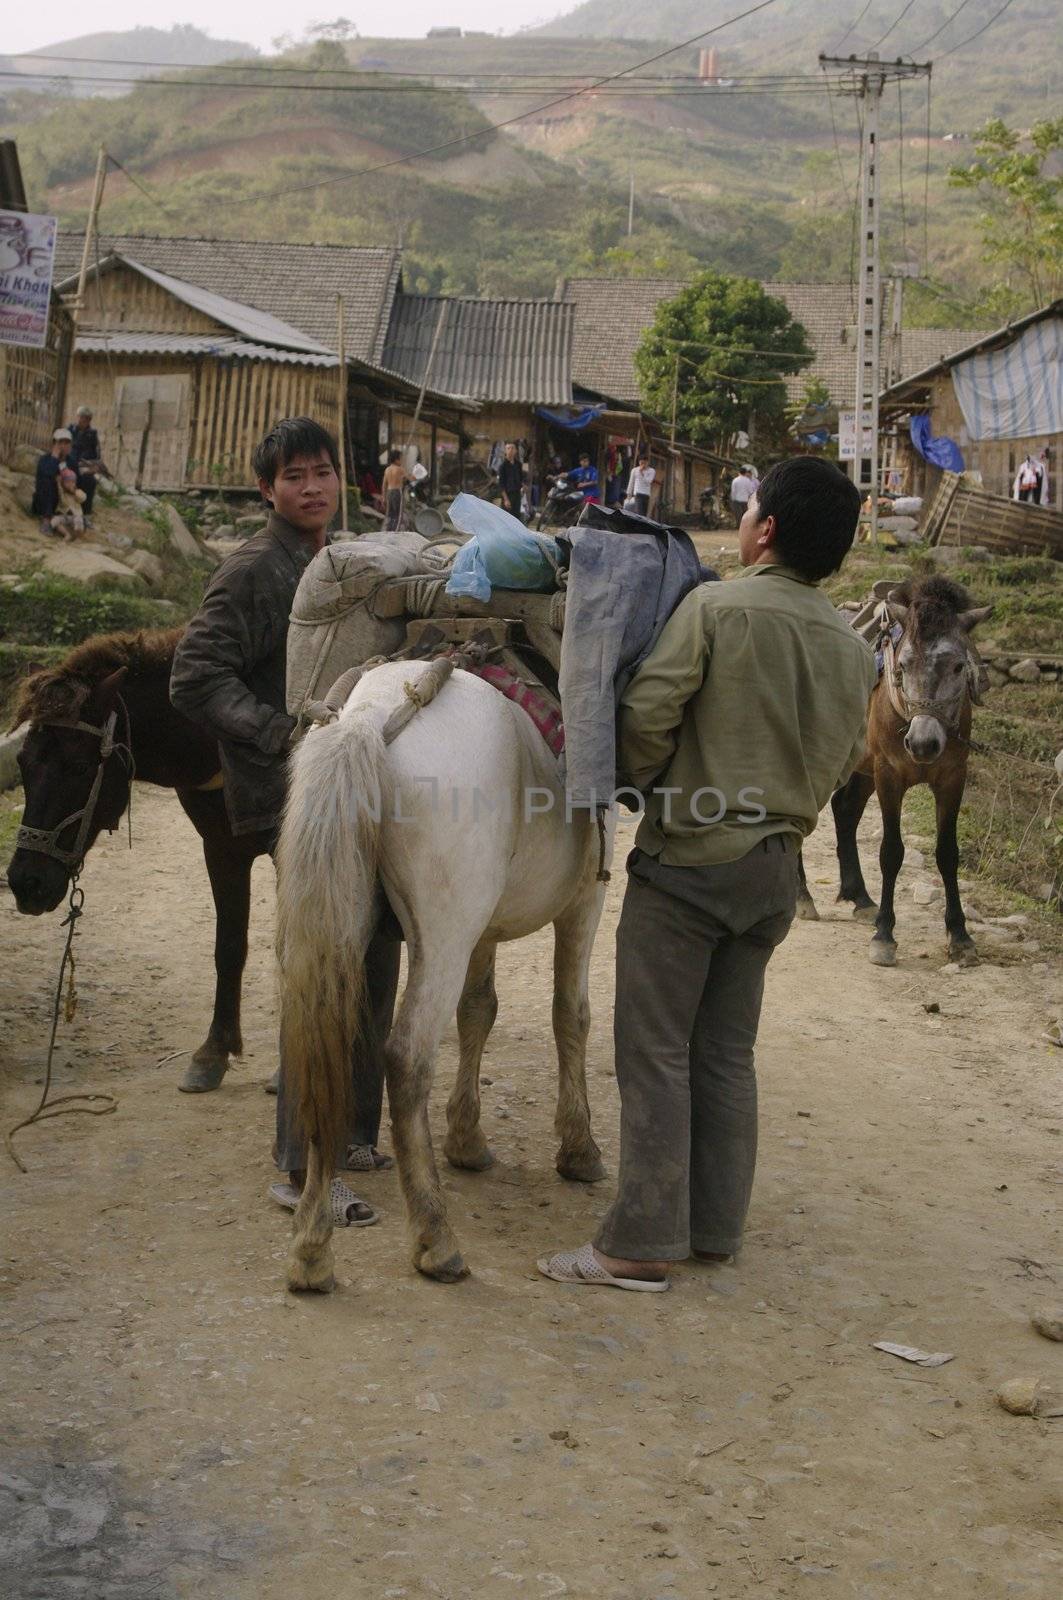 These small horses are strong and powerful. They bear 100 kg of cement in the mountains. The cement is required for certain work in the mountains. The horse is often the only means of transporting heavy loads